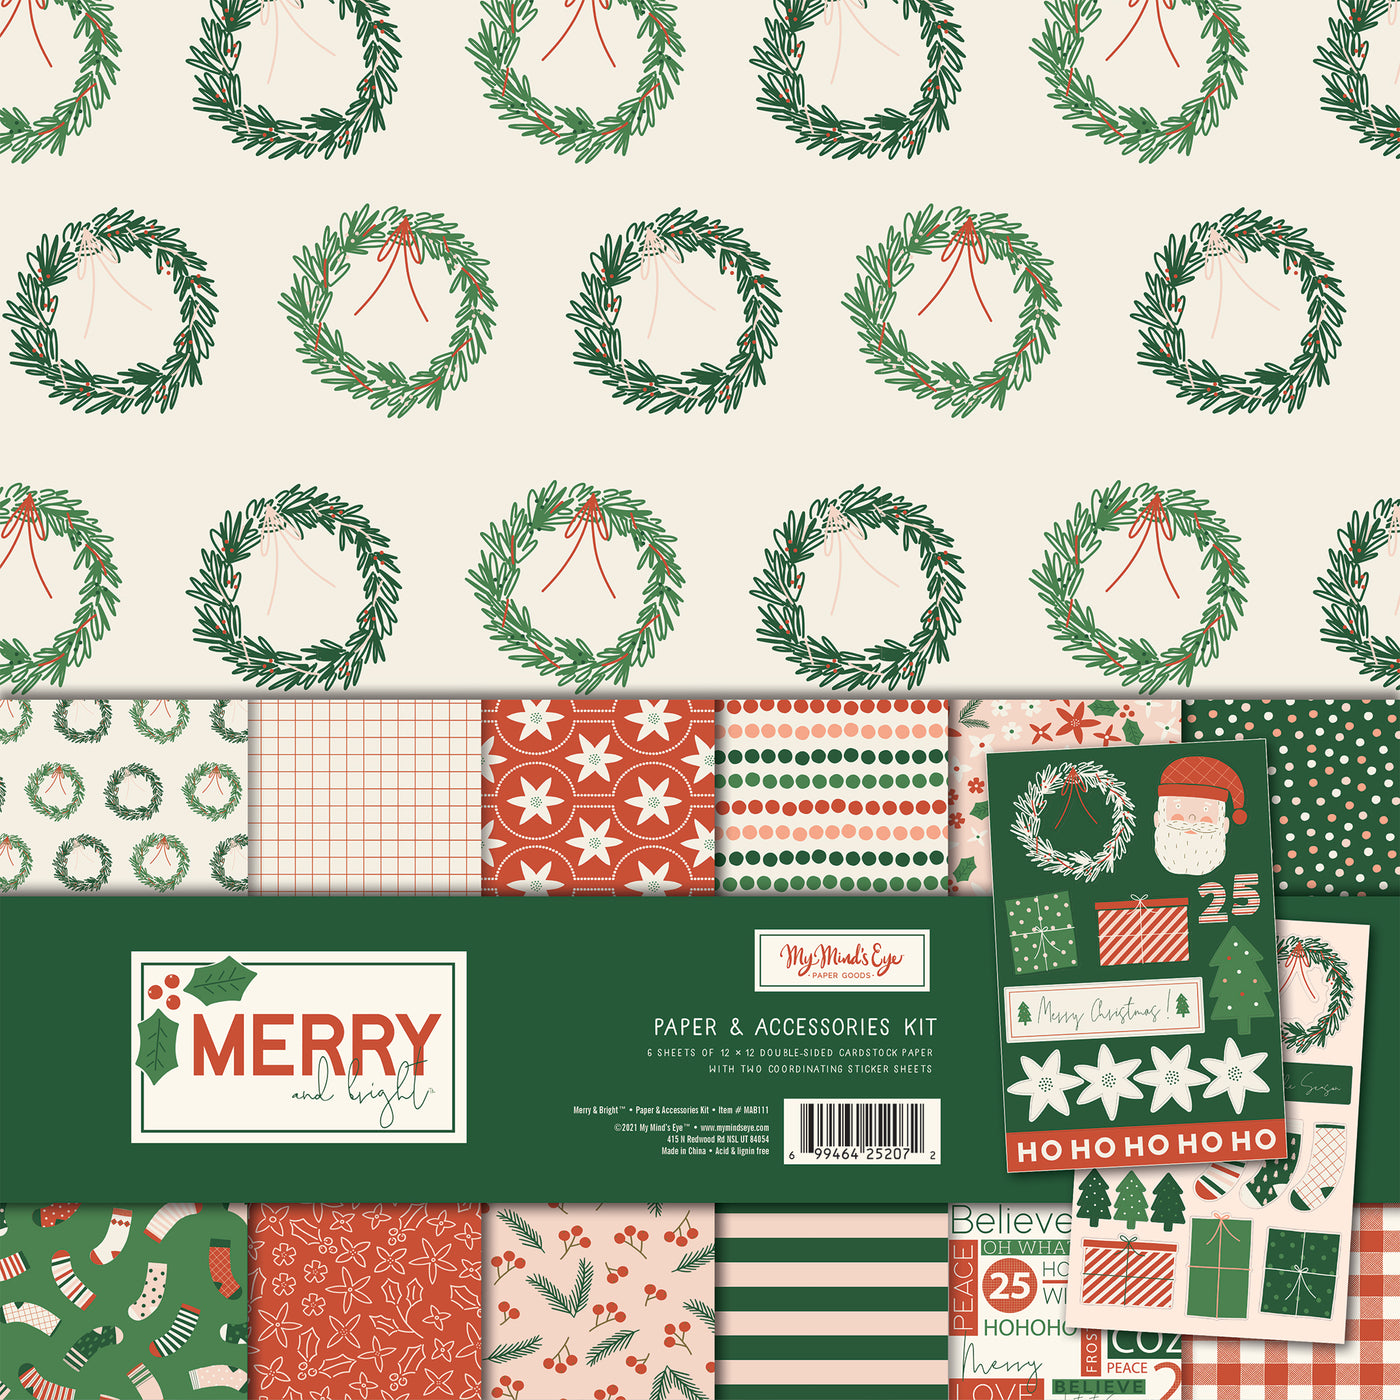 MAB111 - Merry and Bright Paper and Accessories Kit